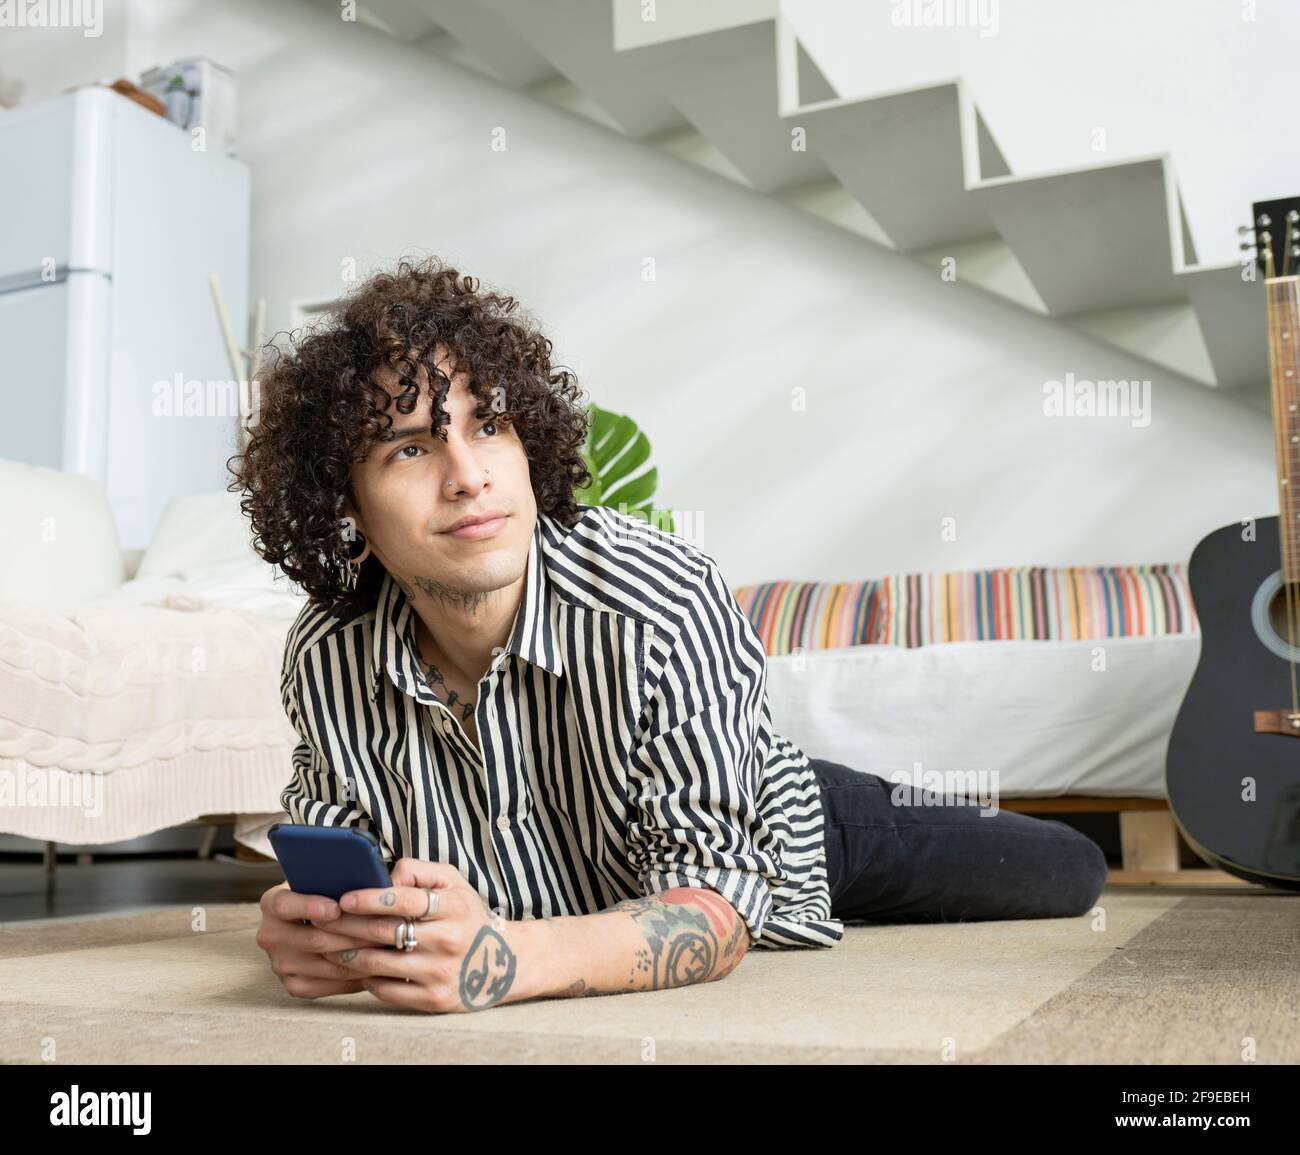 Young contemplative male in striped shirt with tattoos and cellphone lying on carpet while looking up in flat Stock Photo